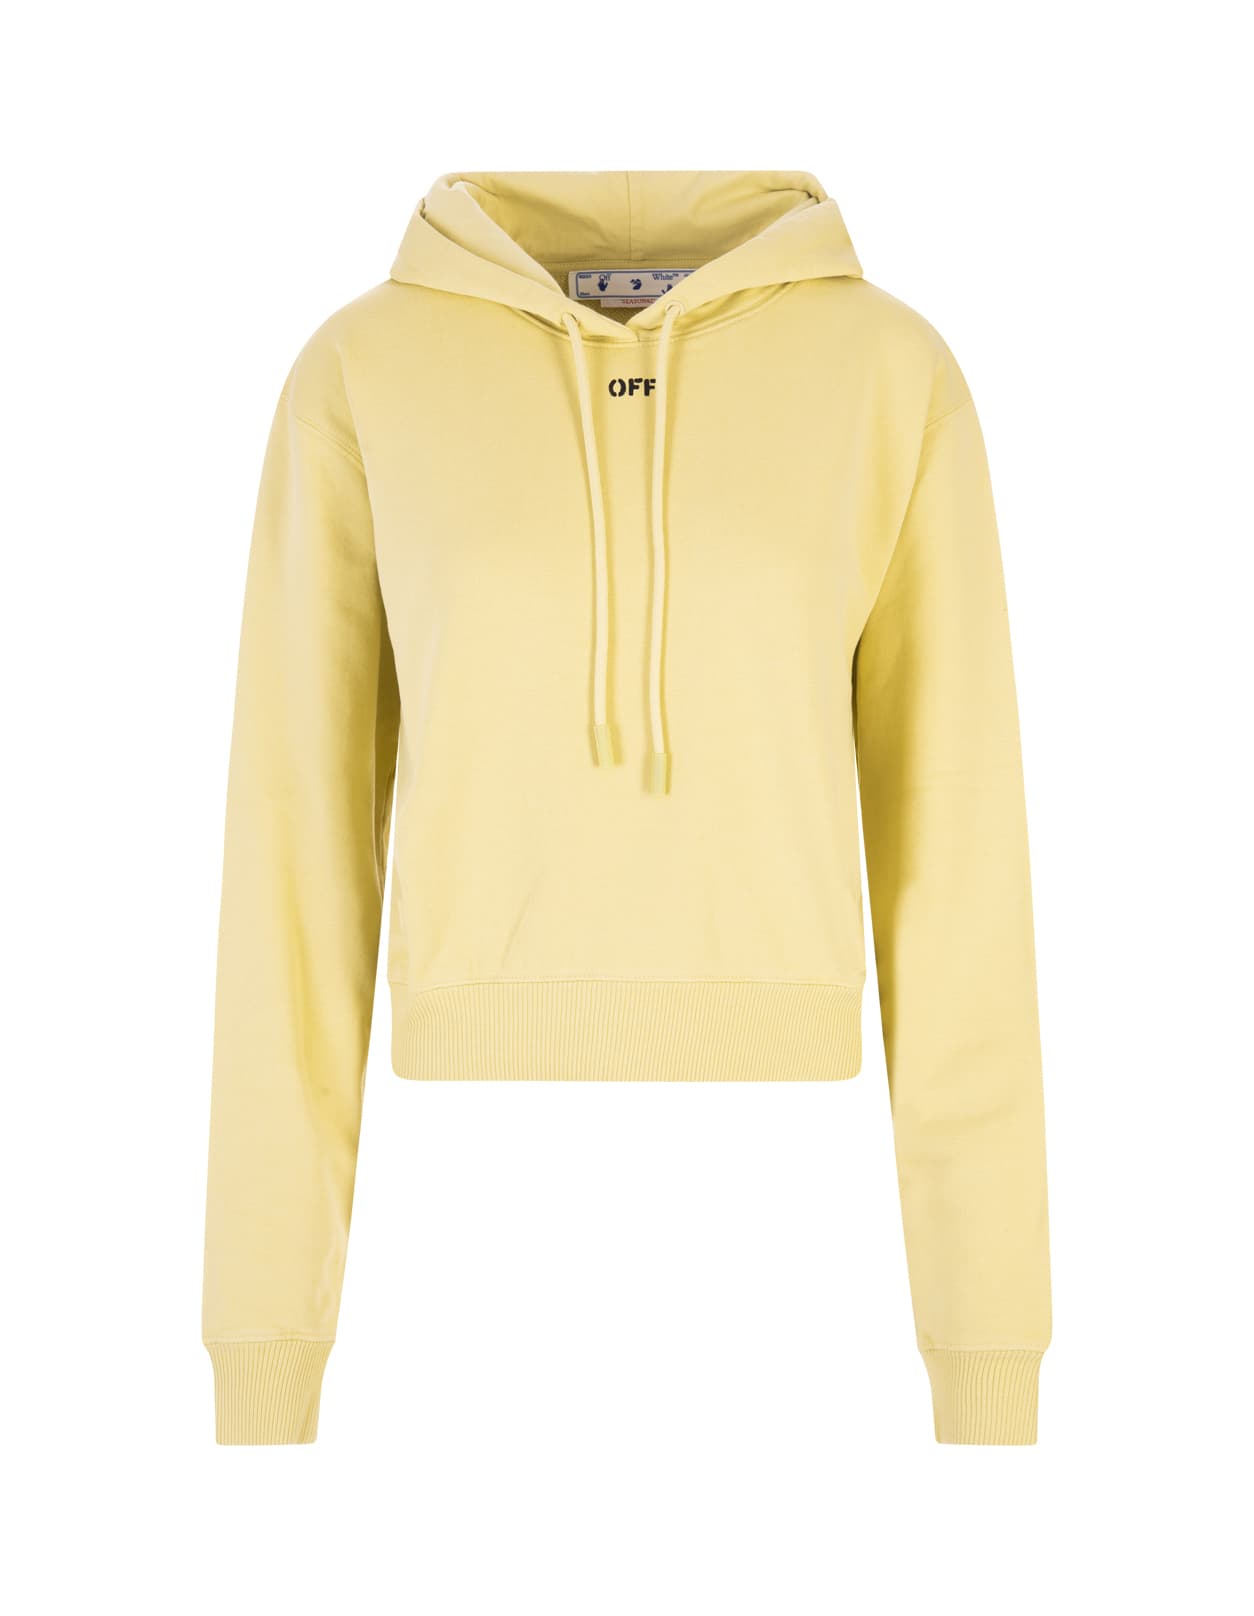 Off-White Woman Yellow Off Stamp Cropped Hoodie